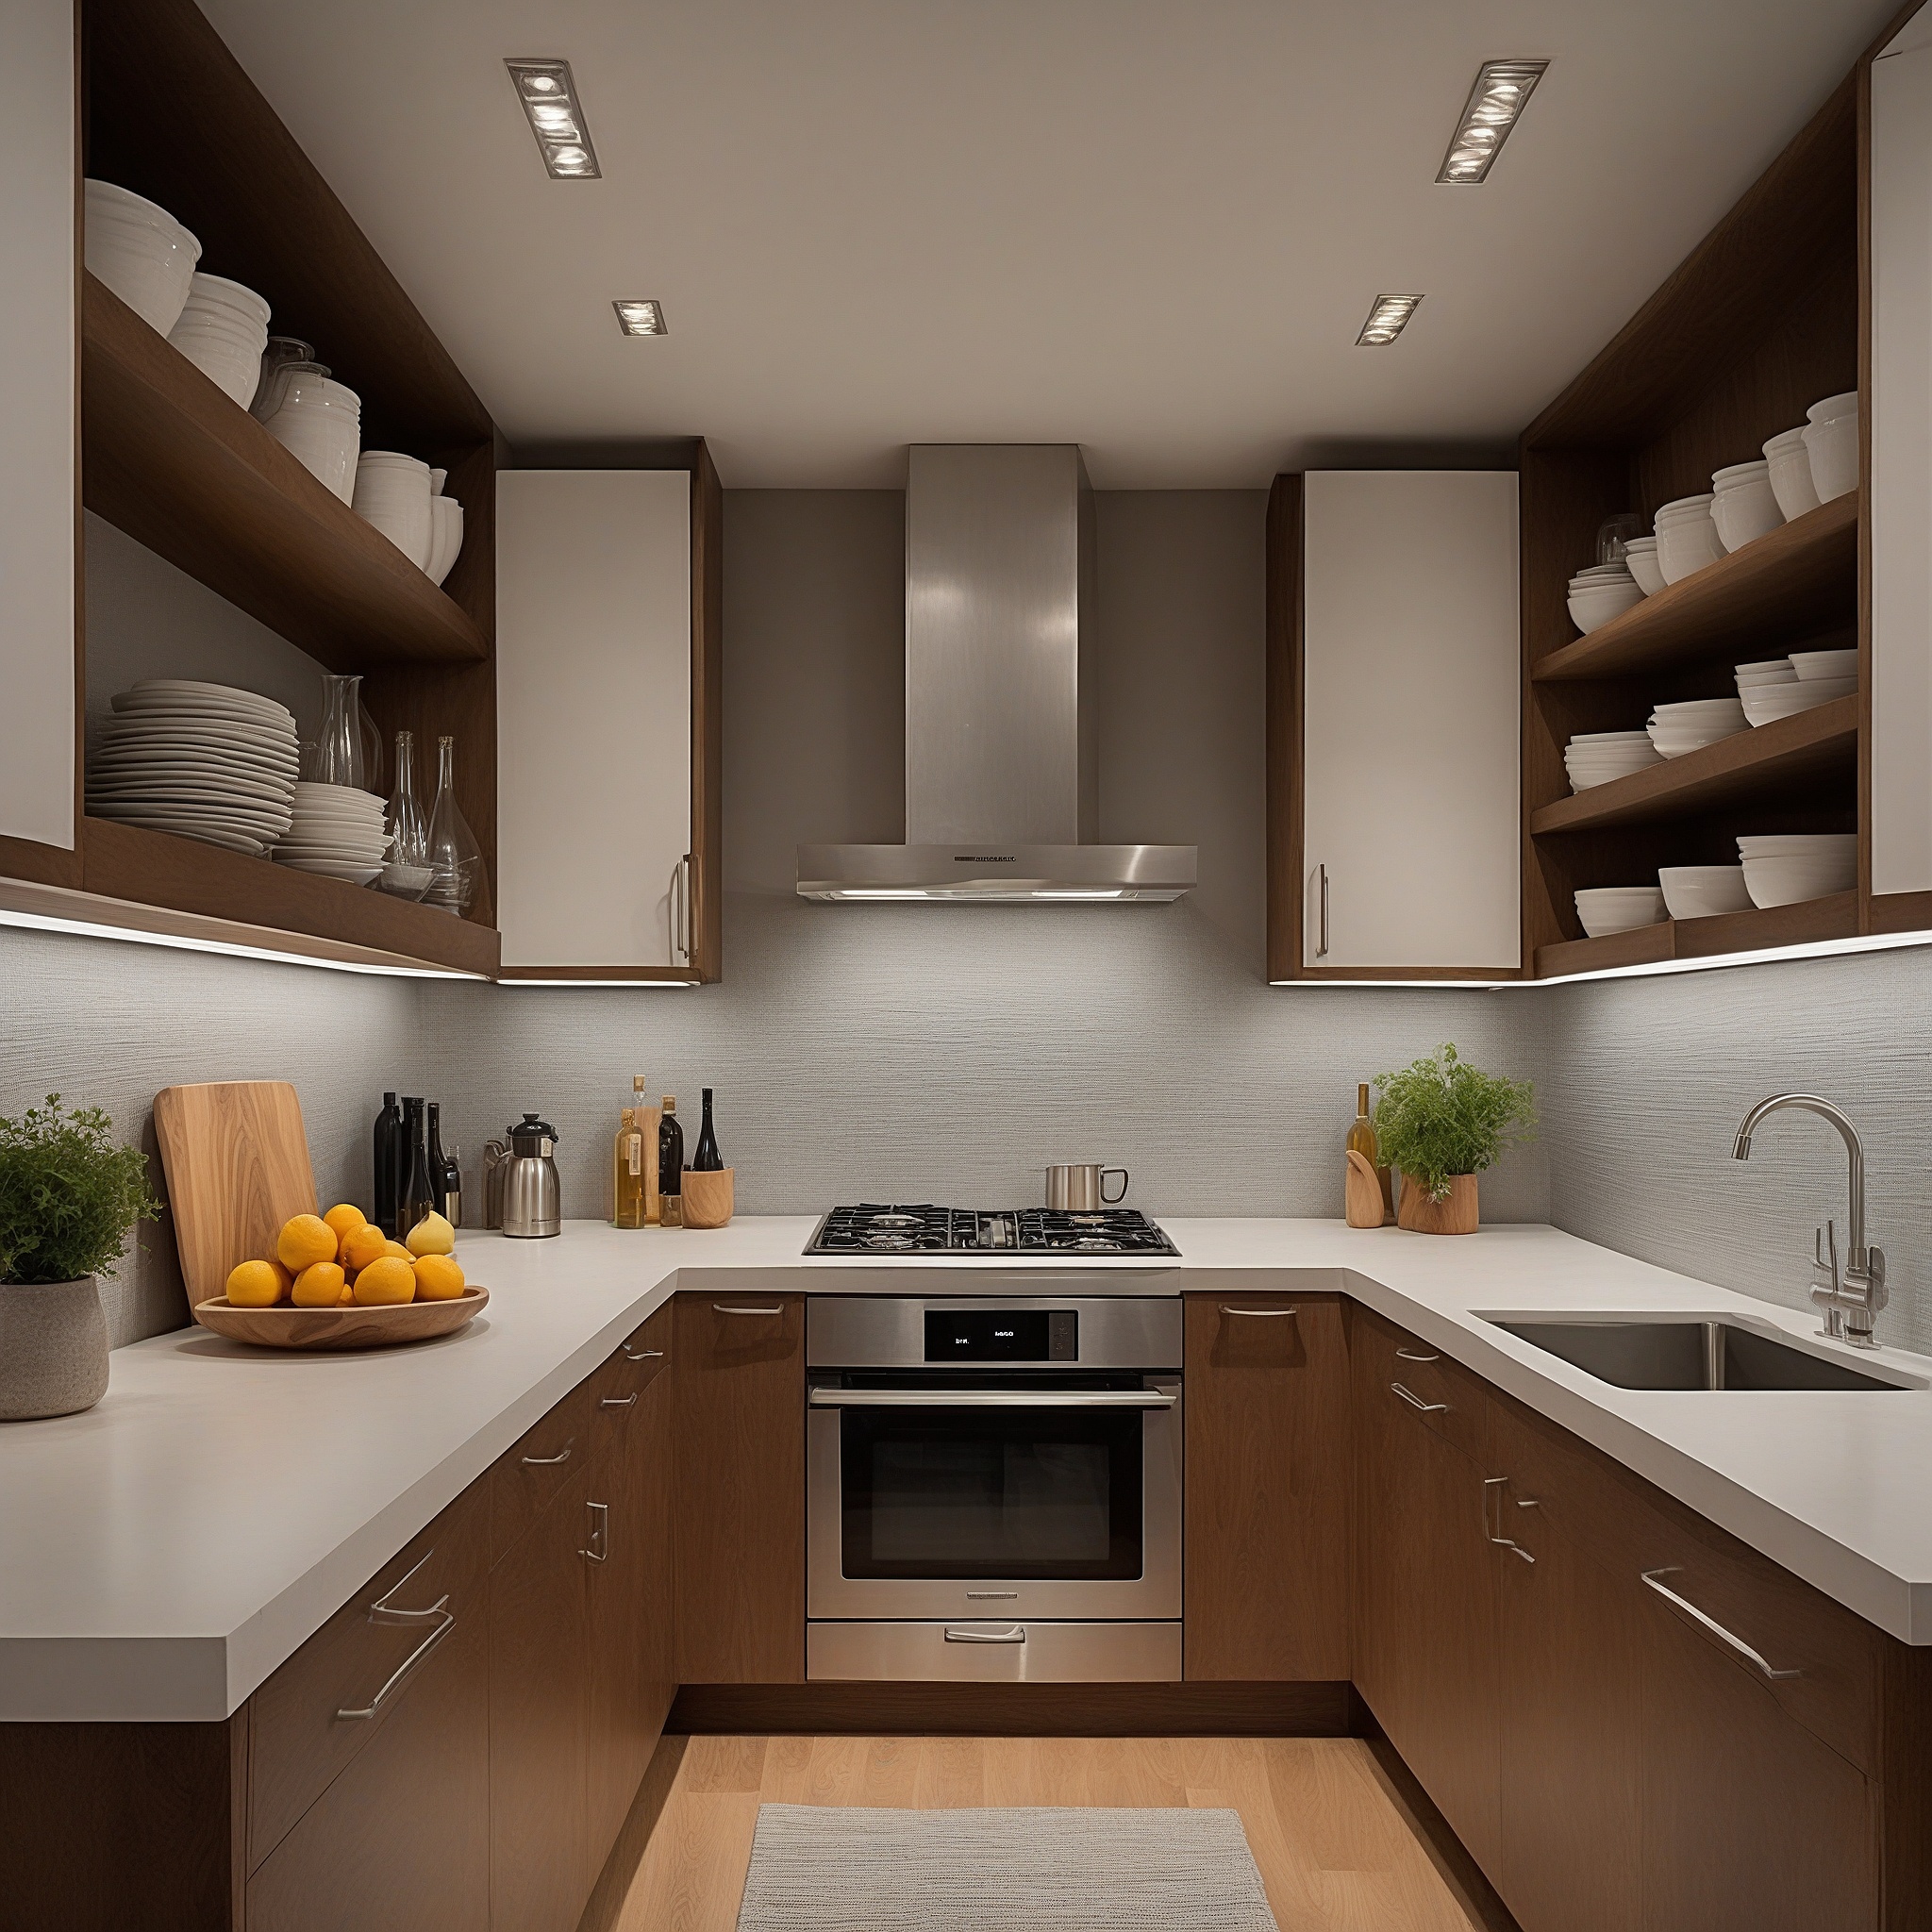 Upper White Cabinets With Wood Veneer Frame With Open Shelving Combo, And Lower Wood Veneer Cabinets